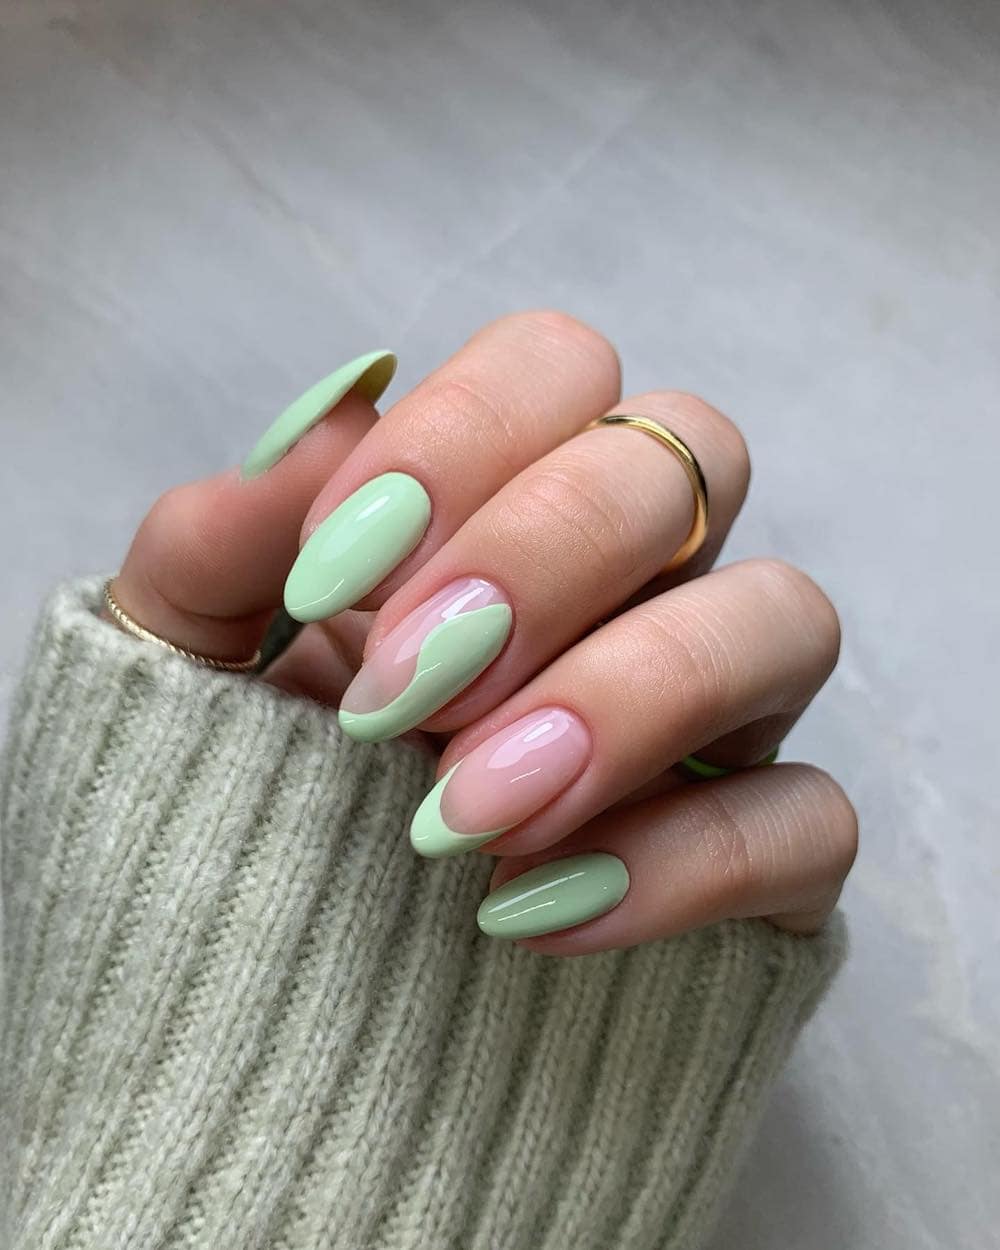 A hand with long almond nails painted with a light spring green polish featuring solid-colored nails, French tips, and a wave accent nail